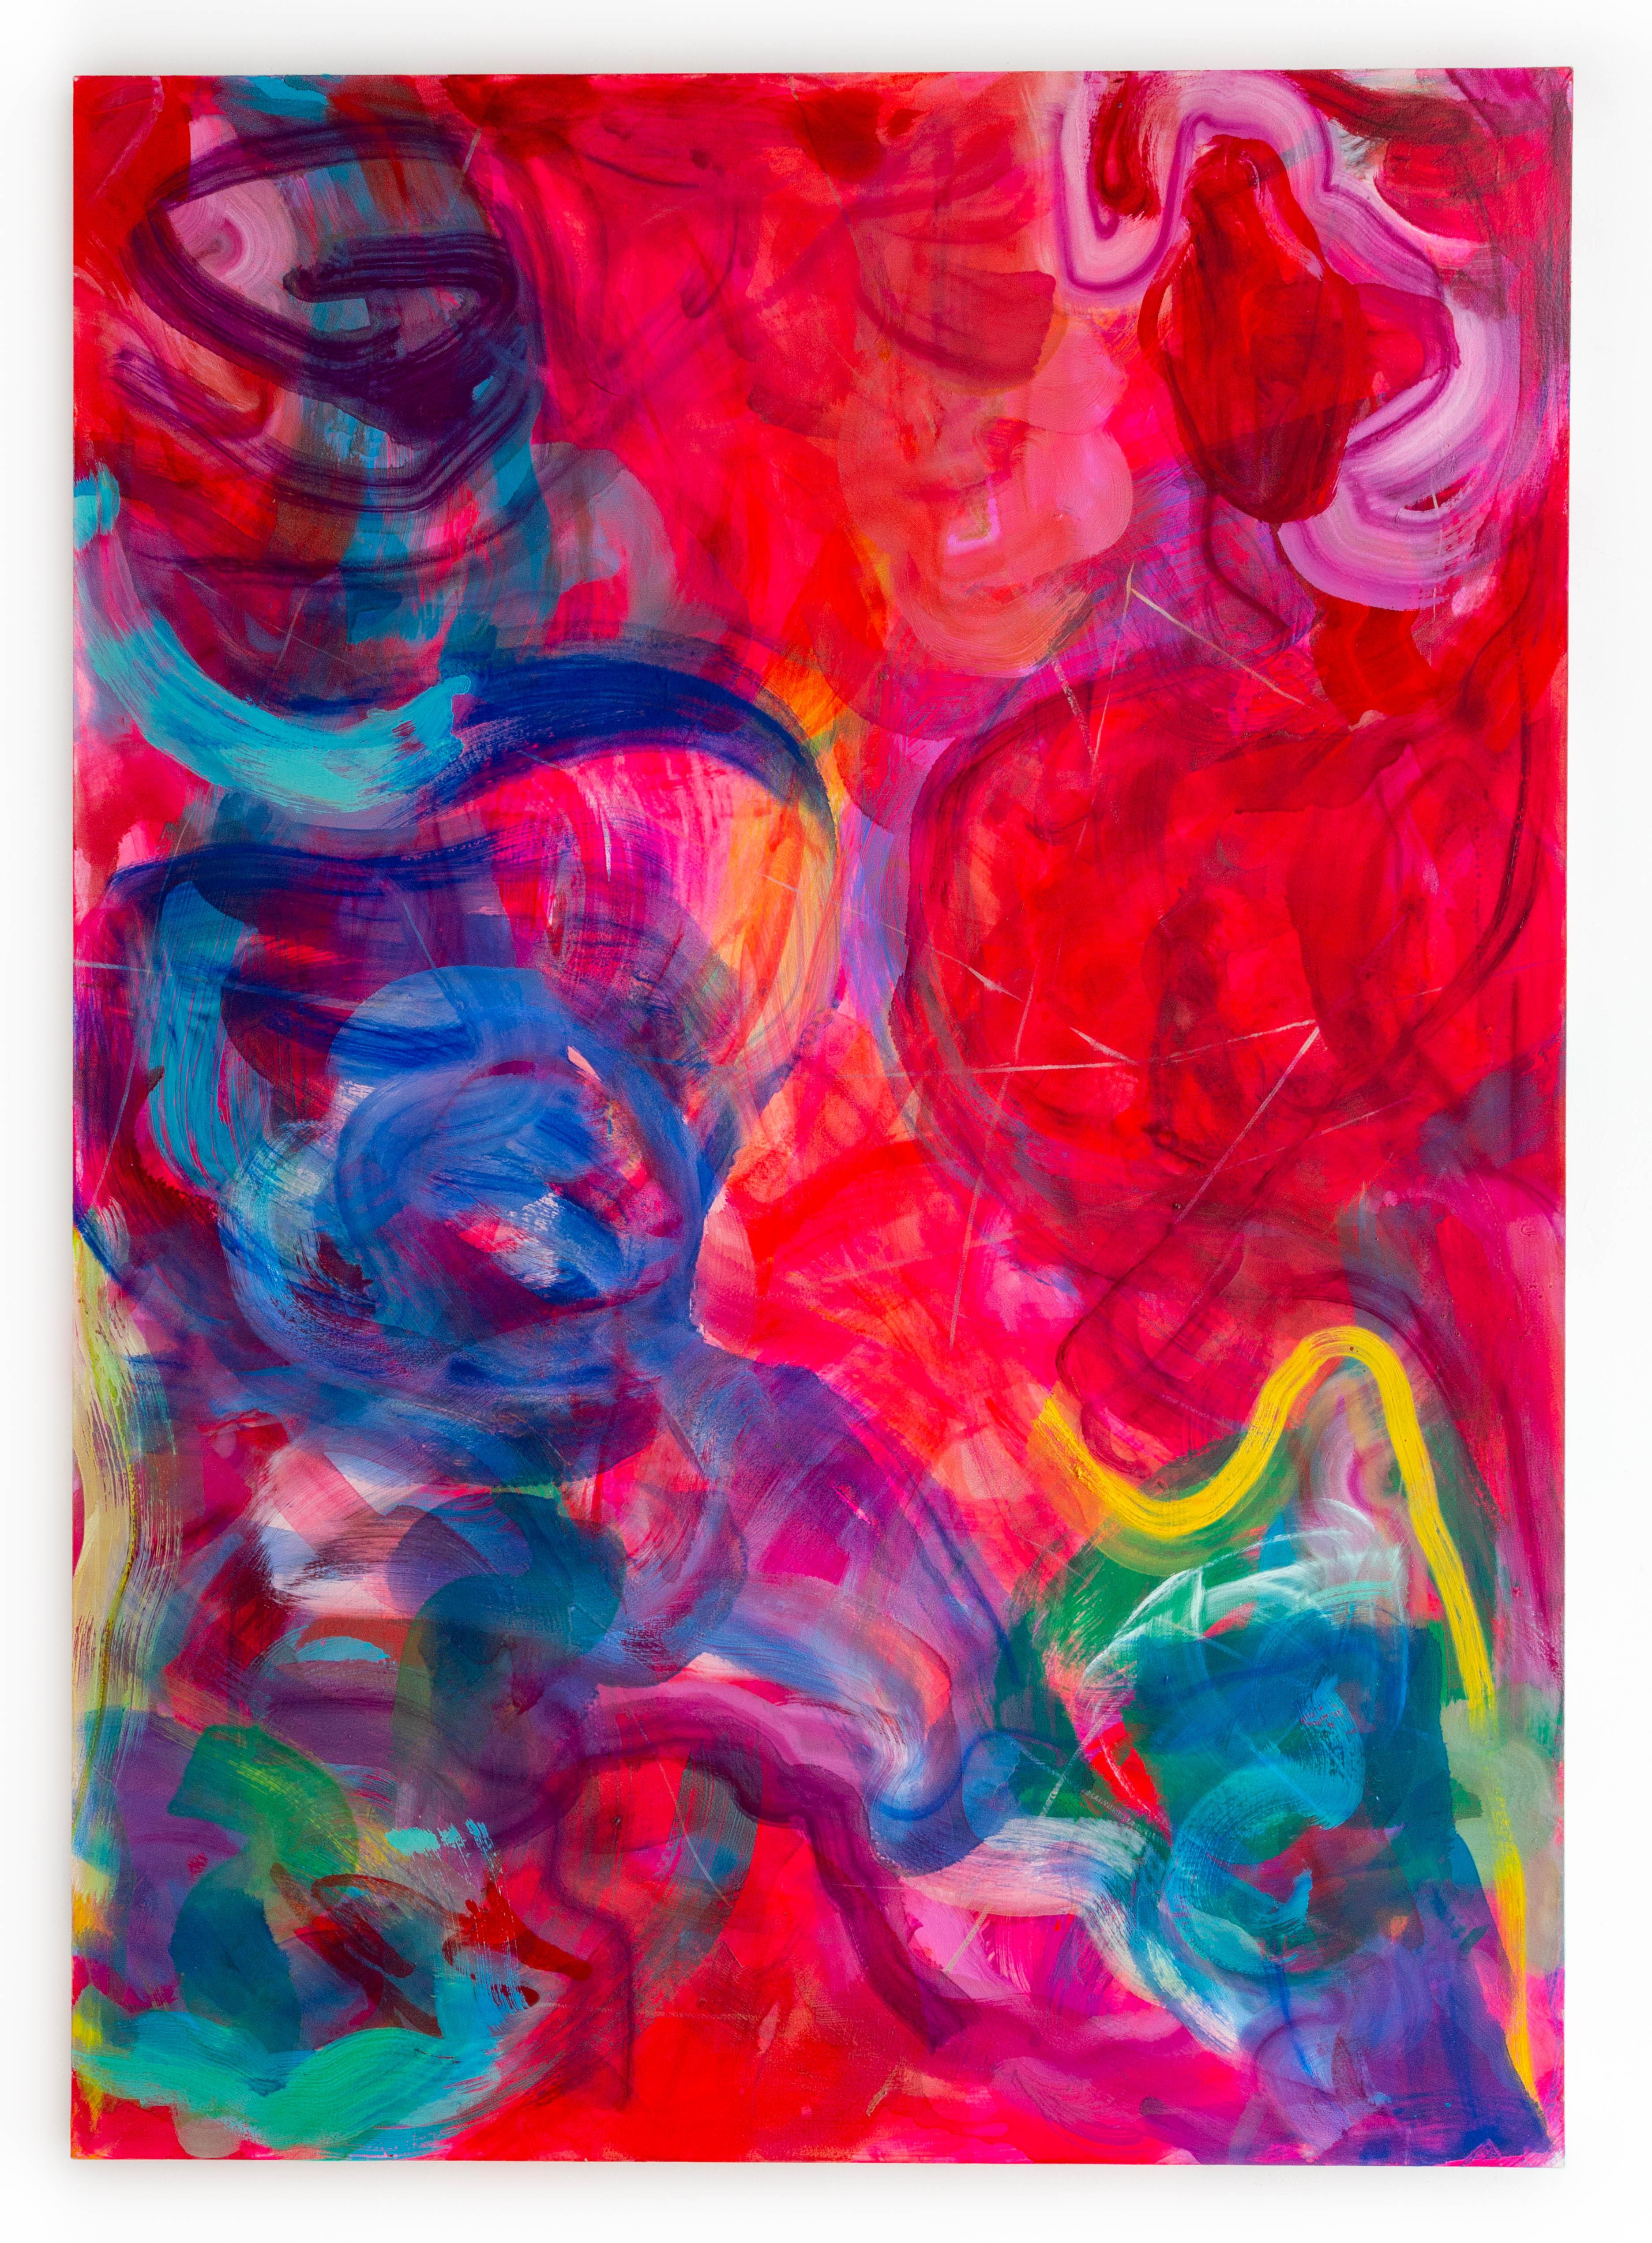 84"x60" oil and acrylic on canvas, signed on reverse by the artist.  Scarlet red and violet intermingle in this gestural abstract, large scale painting by New York/Hawaiian artist, Debra Drexler.  Swirls of blue interplay with the crimson tones, in